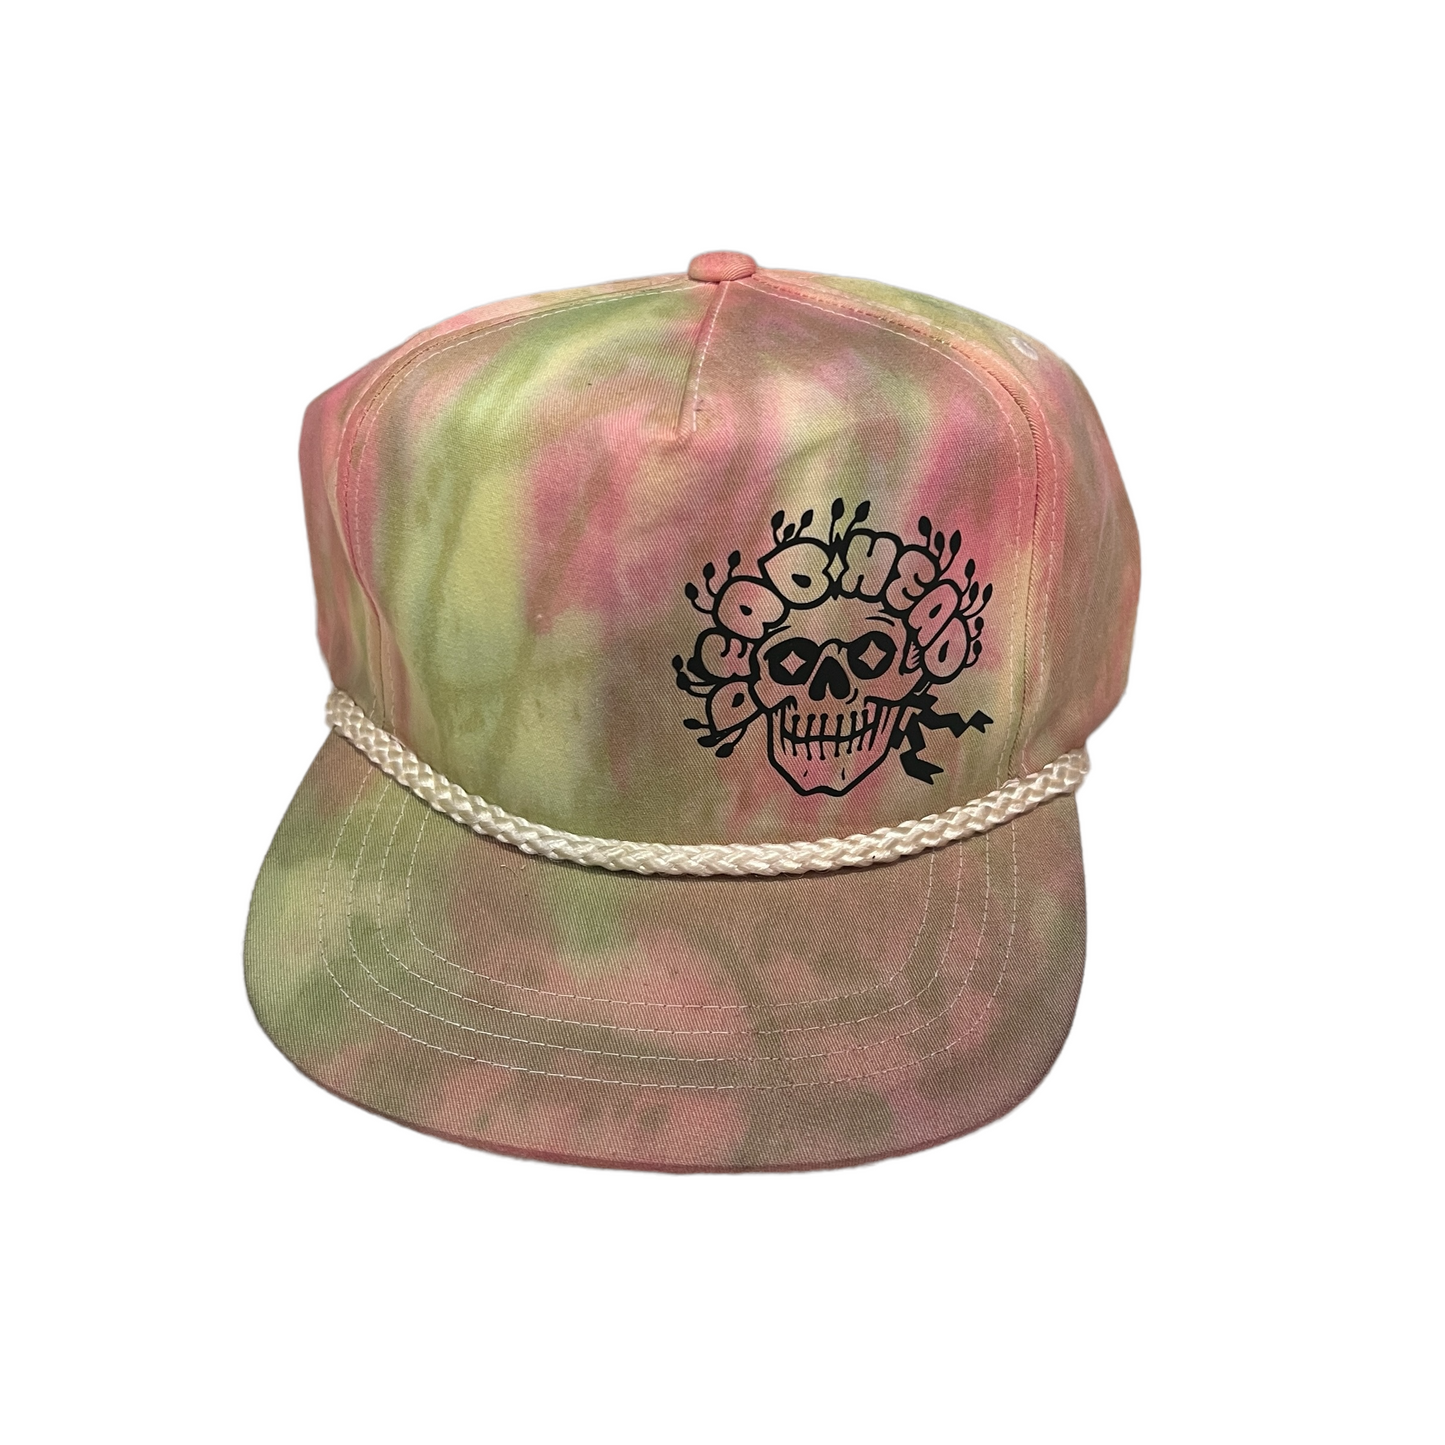 Hand dyed hat - dead head